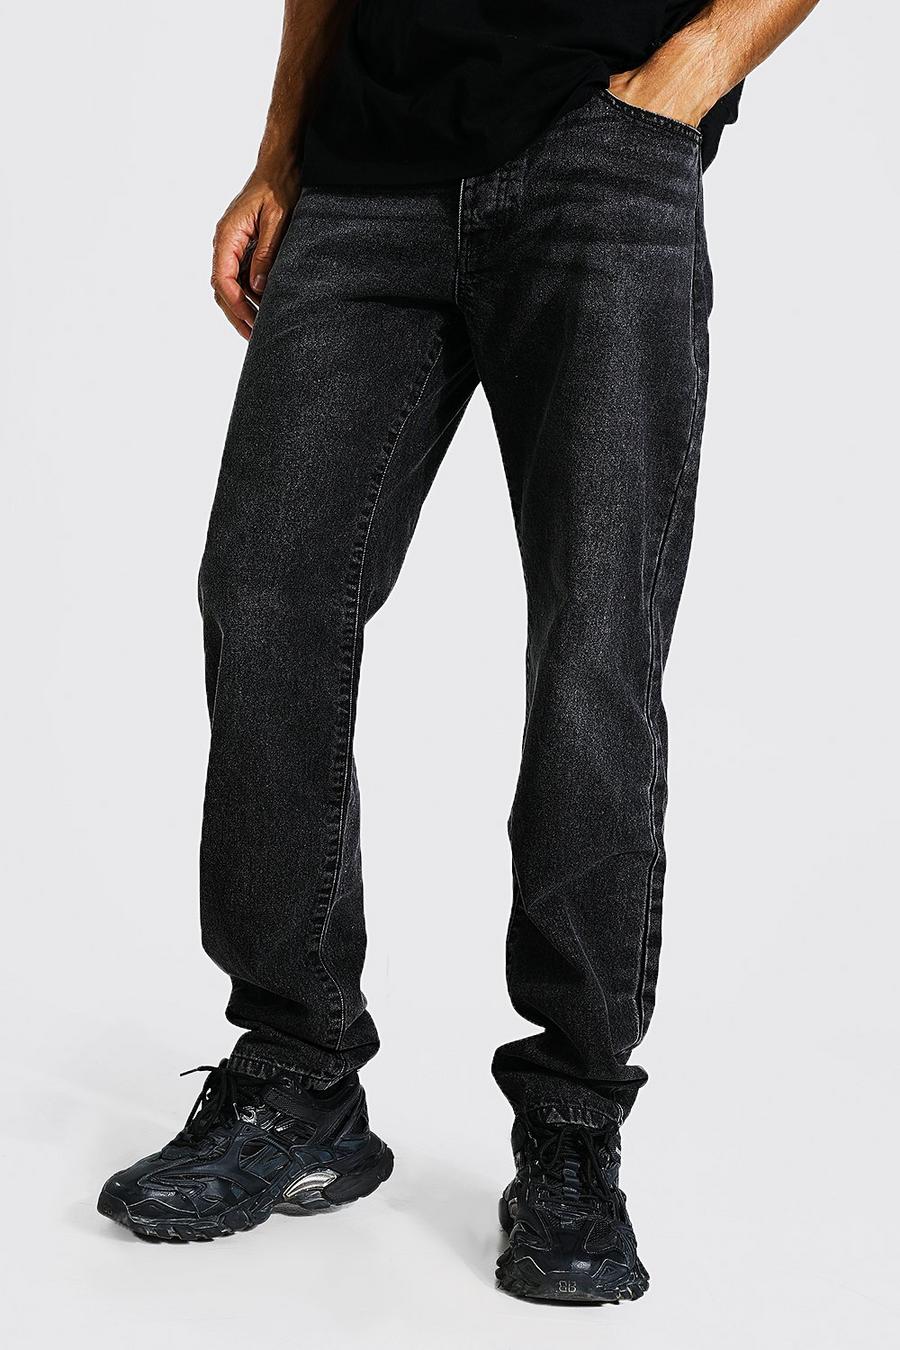 Charcoal grey Tall Relaxed Fit Jeans